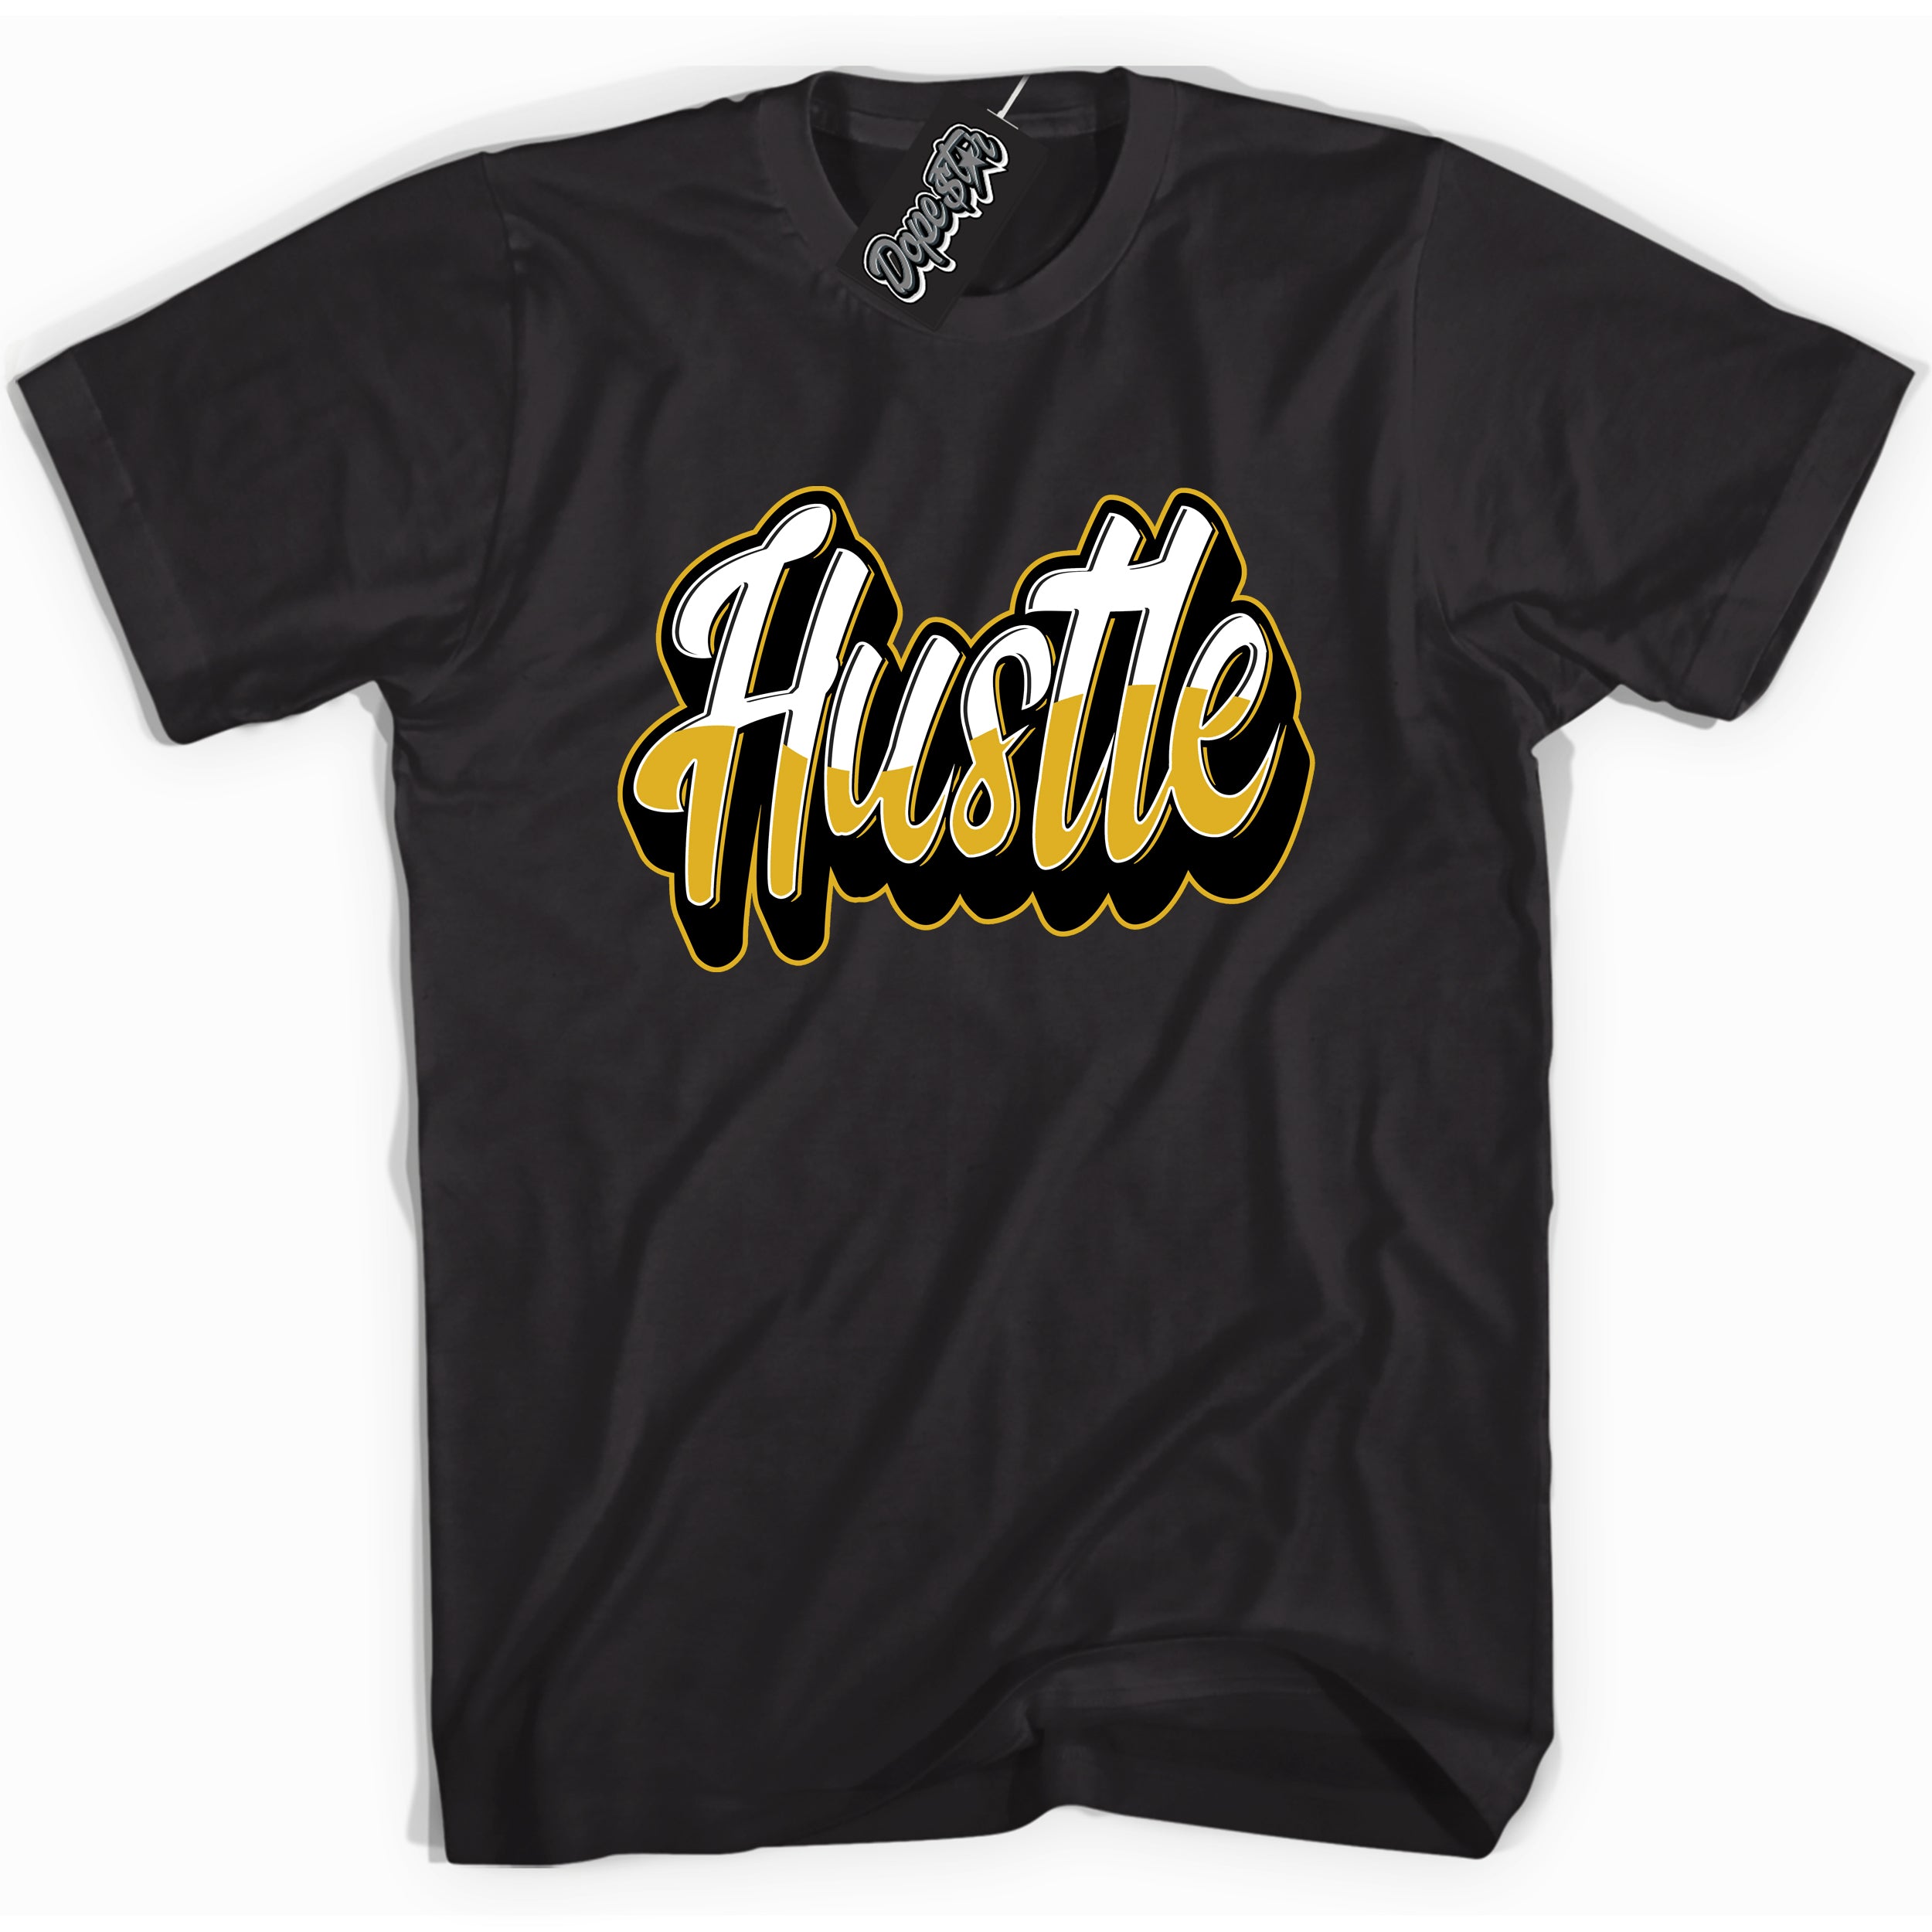 Cool Black Shirt with “ Hustle ” design that perfectly matches Yellow Ochre 6s Sneakers.